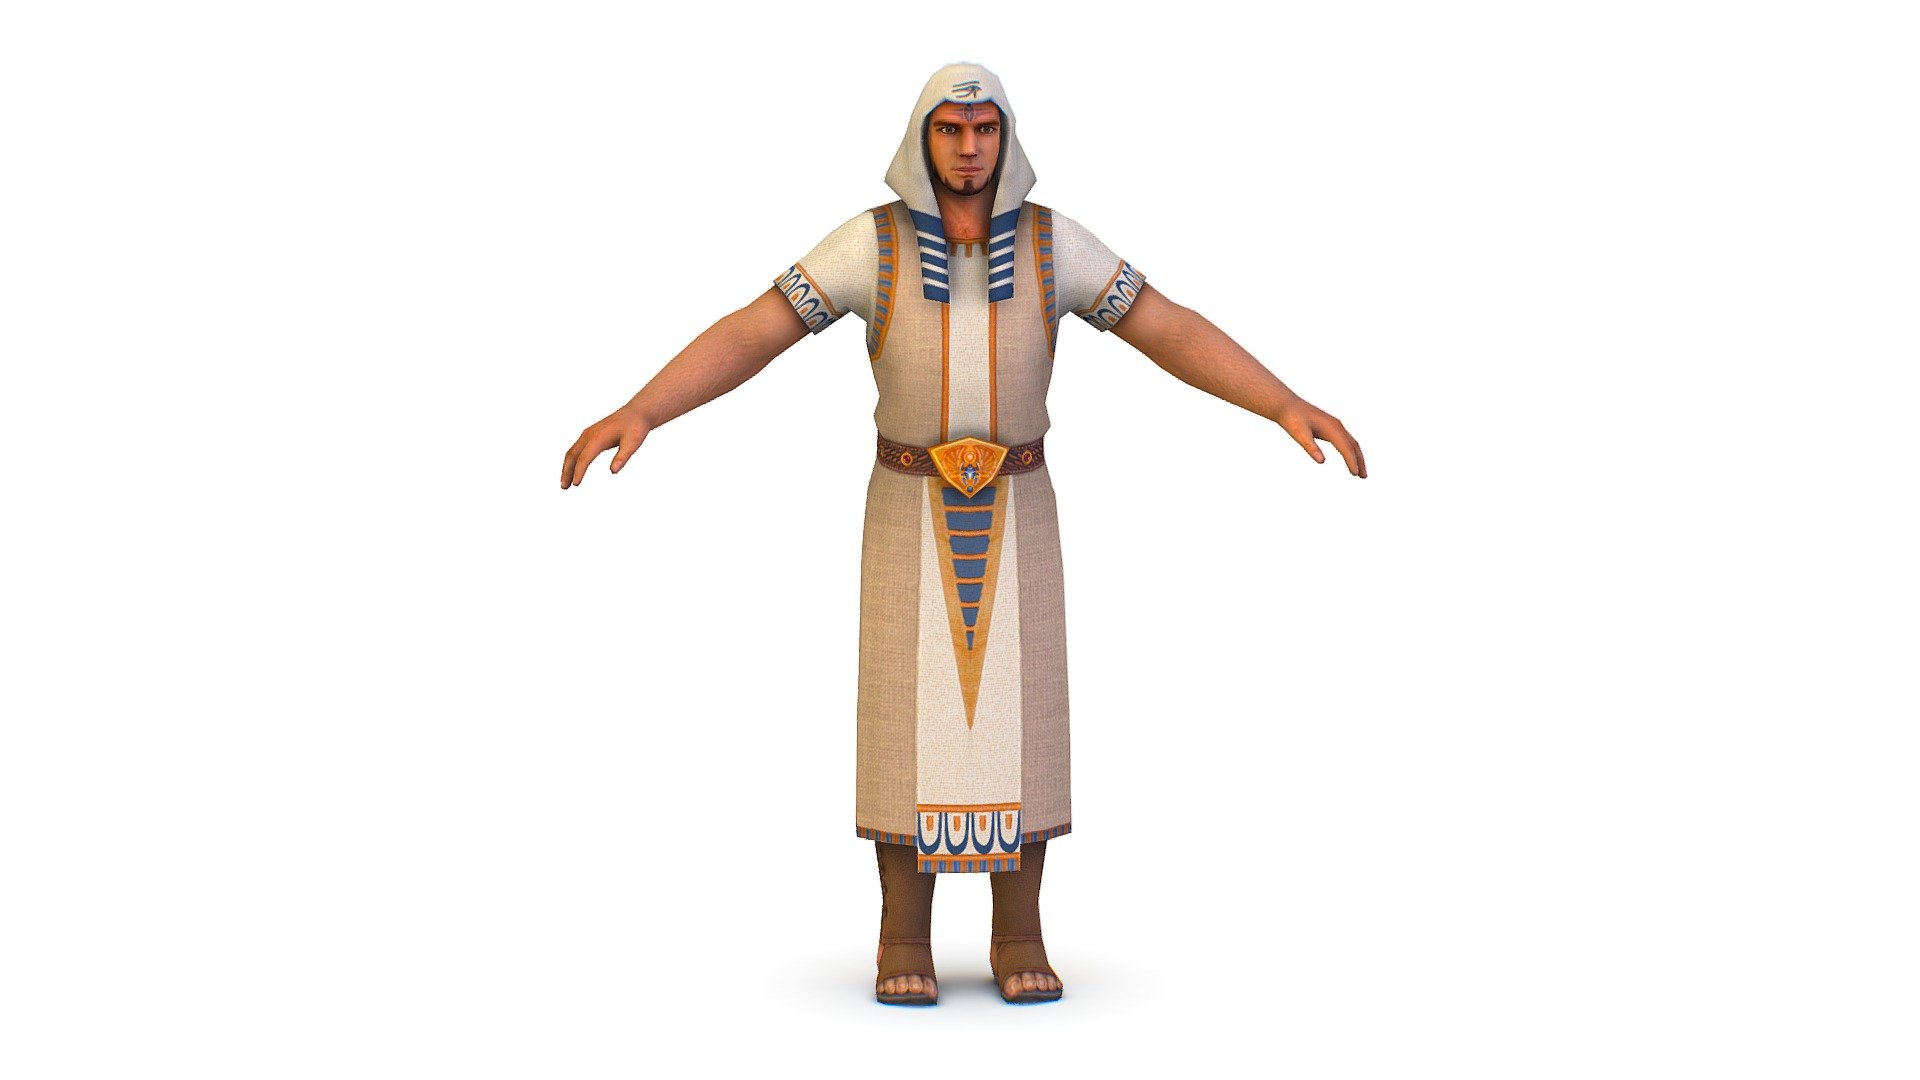 1 color textures 1024x1024

2100 poly count


3dsMax / Maya file included




Support me on Patreon, please - https://www.patreon.com/art_book


 - a Young Man Dressed as an Egyptian Pharaoh - Buy Royalty Free 3D model by Oleg Shuldiakov (@olegshuldiakov) 3d model